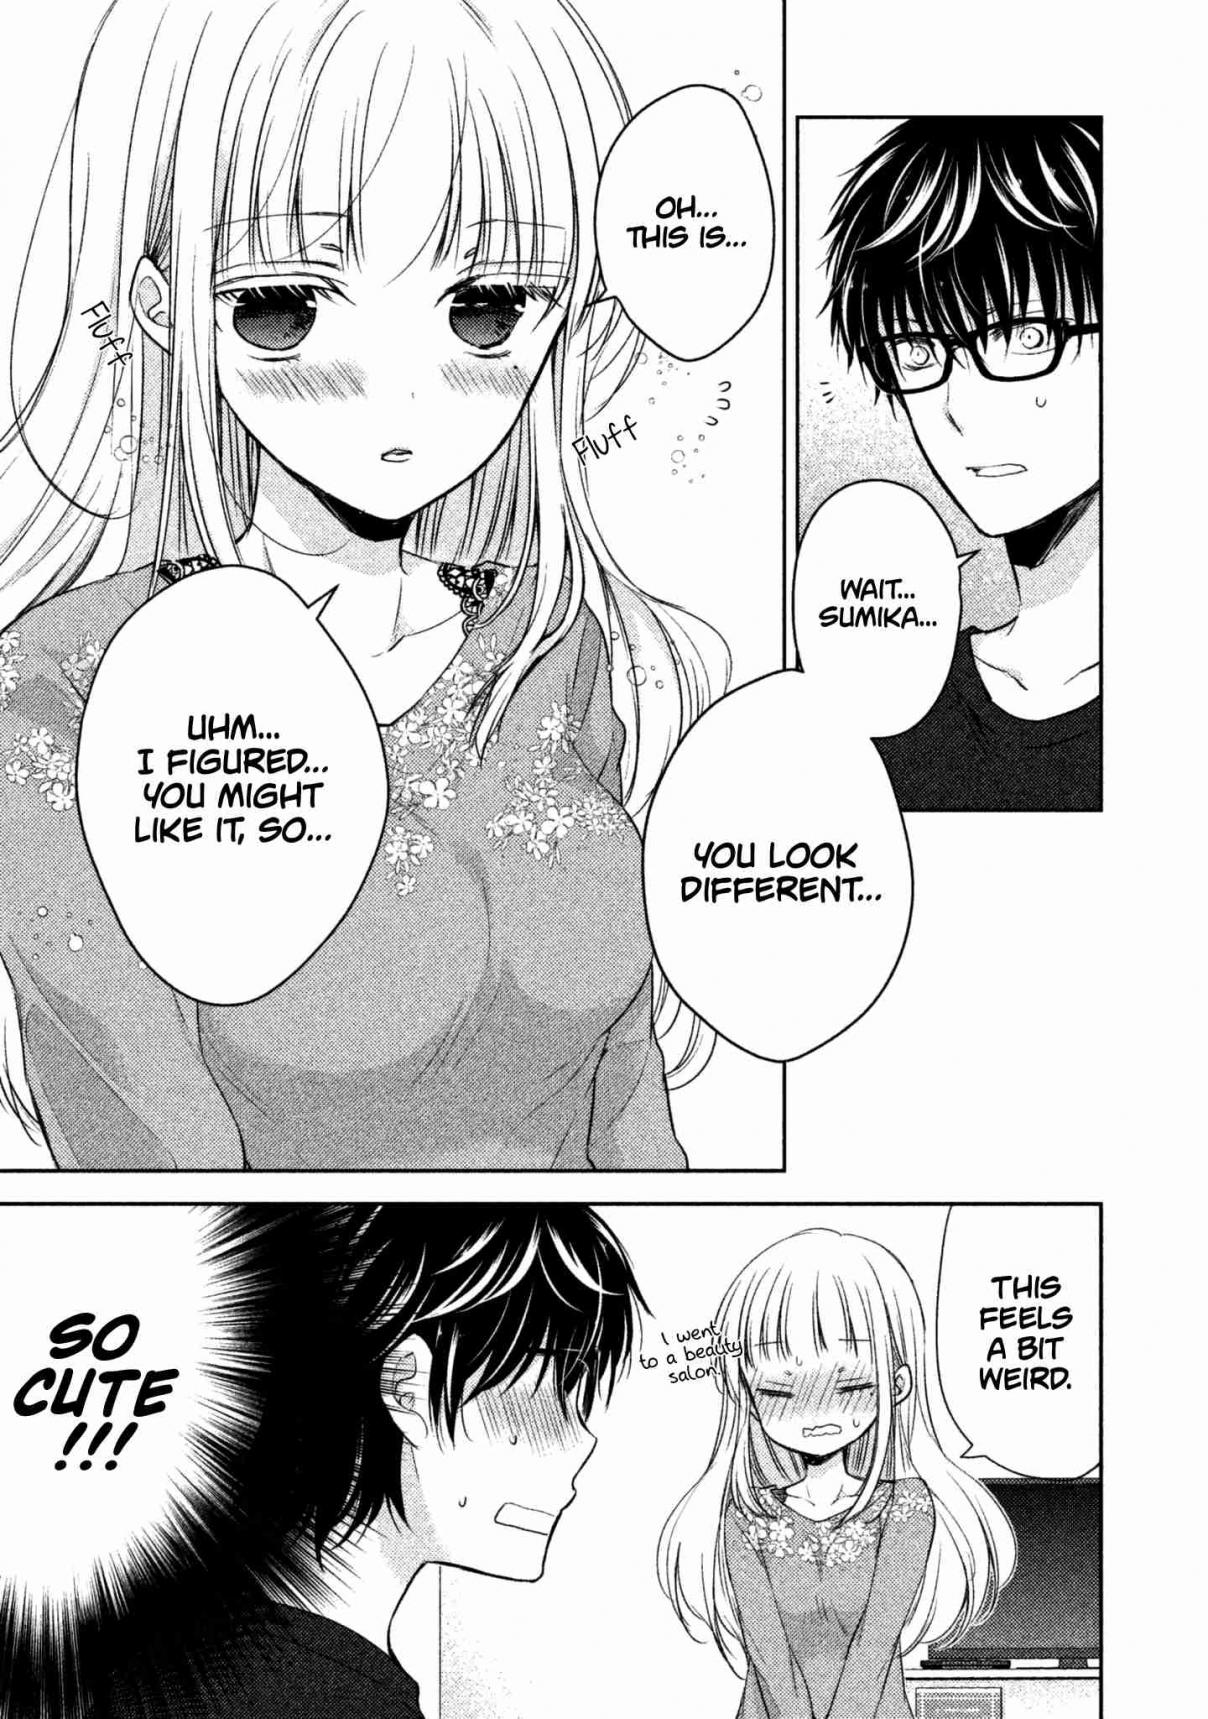 We May Be An Inexperienced Couple But... Vol. 1 Ch. 2 How To Ask a New Bride